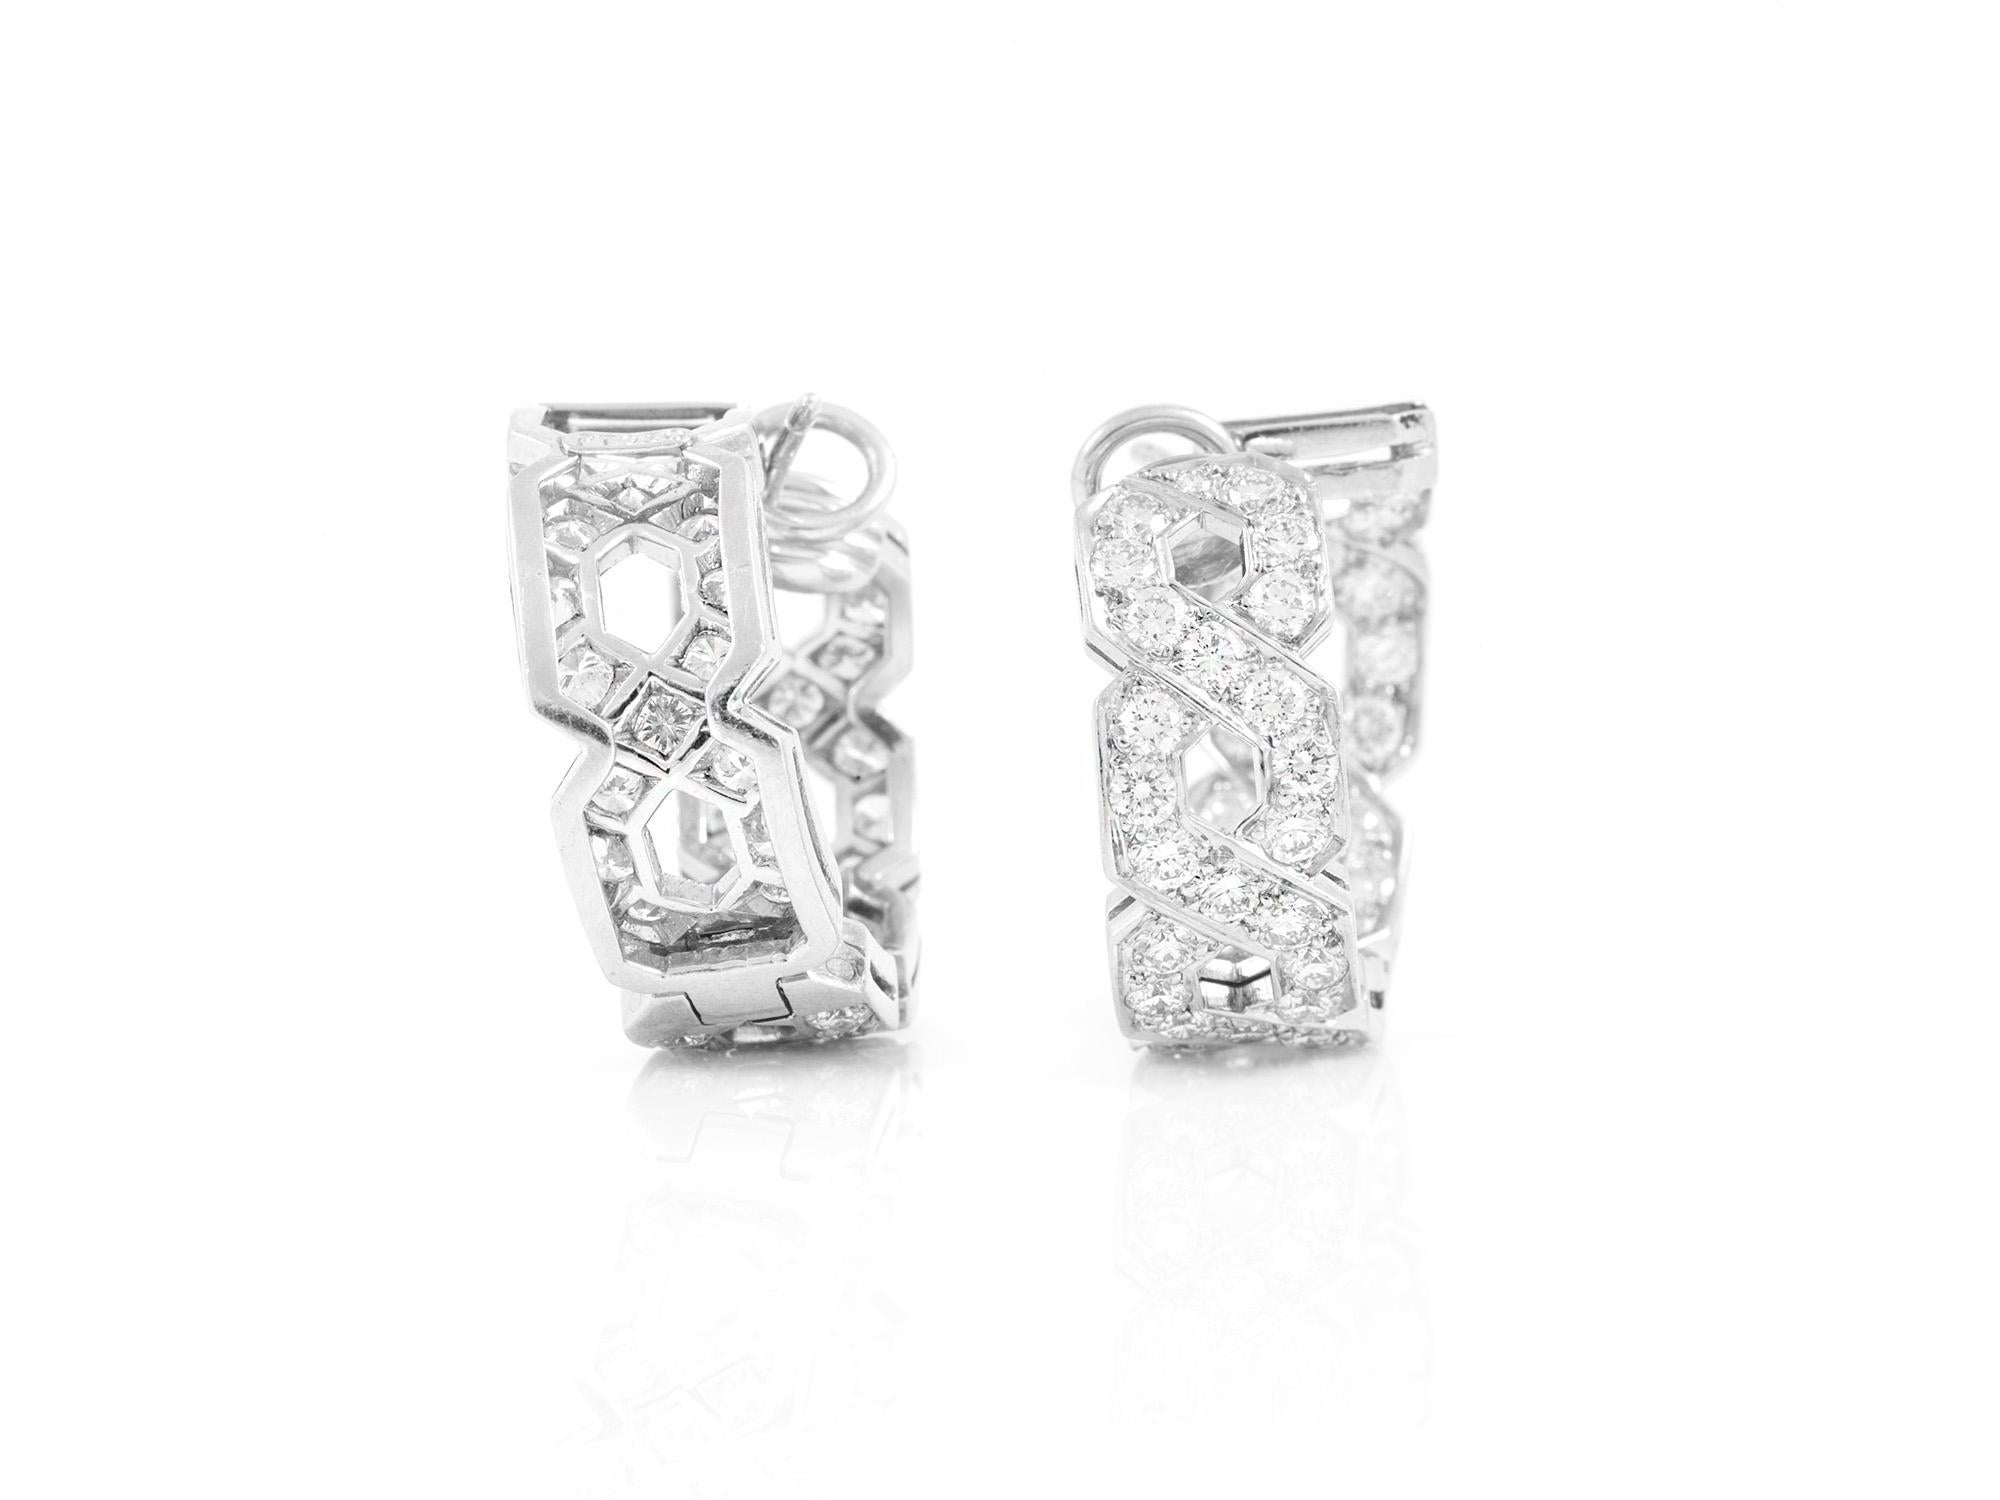 Tiffany & Co. earrings finely crafted in platinum with diamonds. 